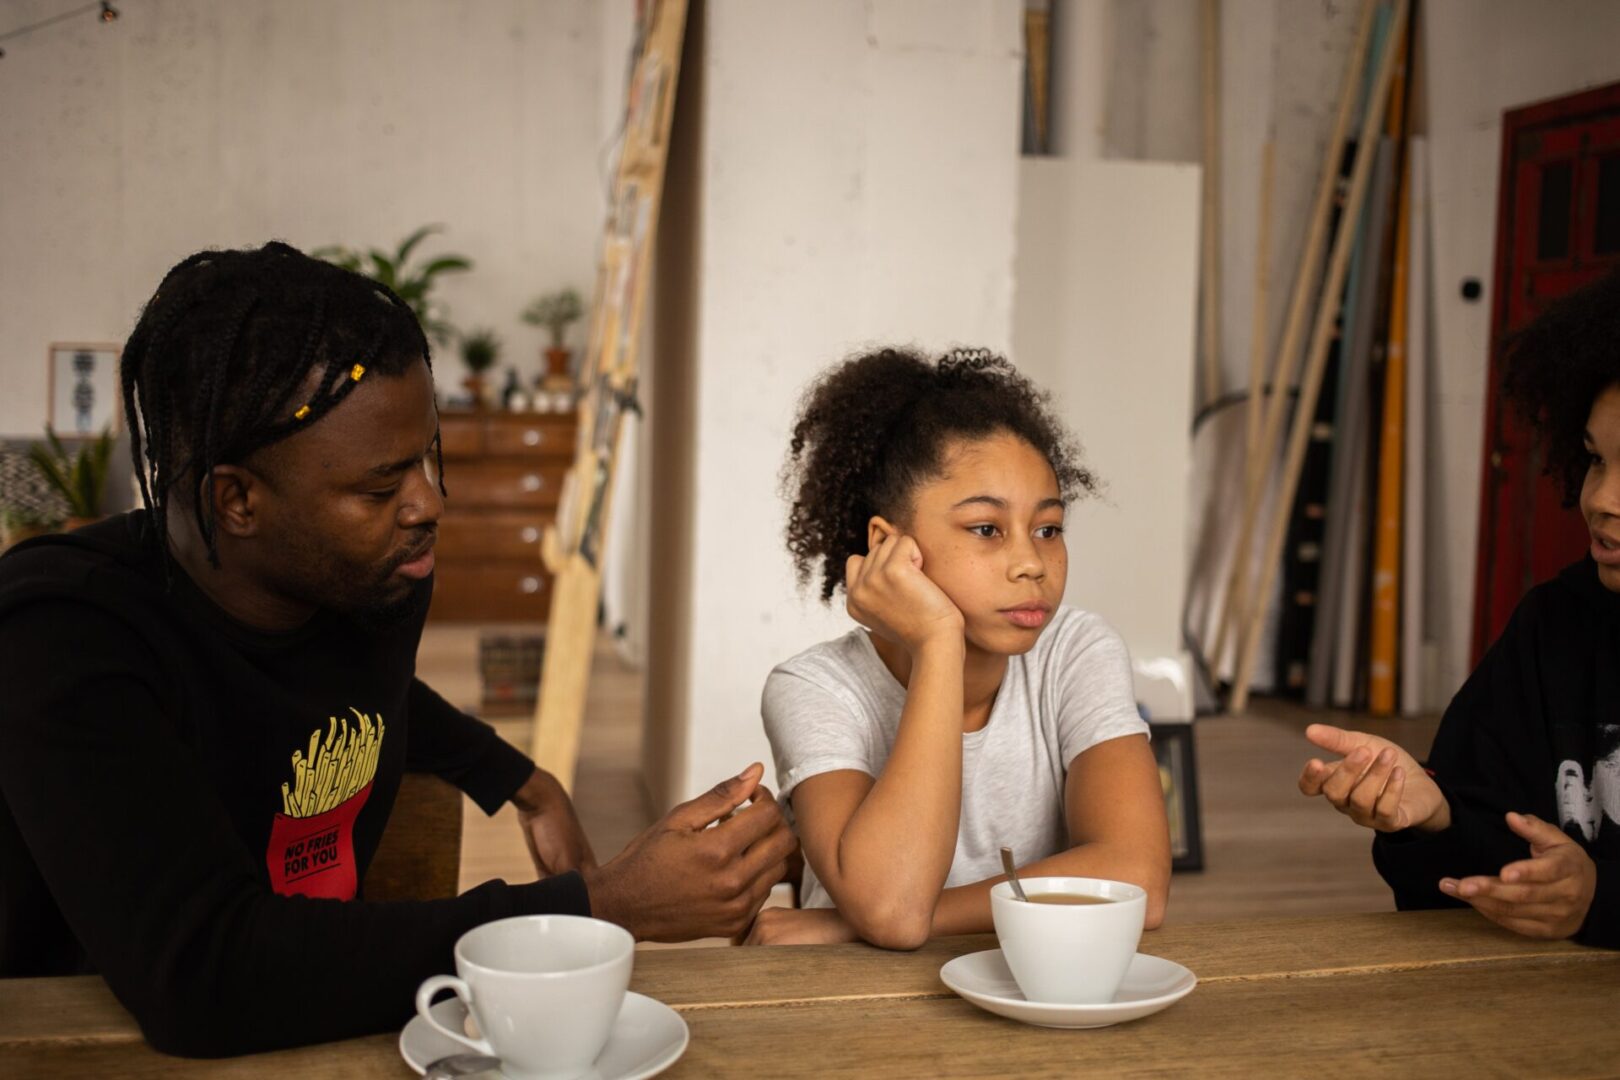 Frustrated black girl between arguing parents at table